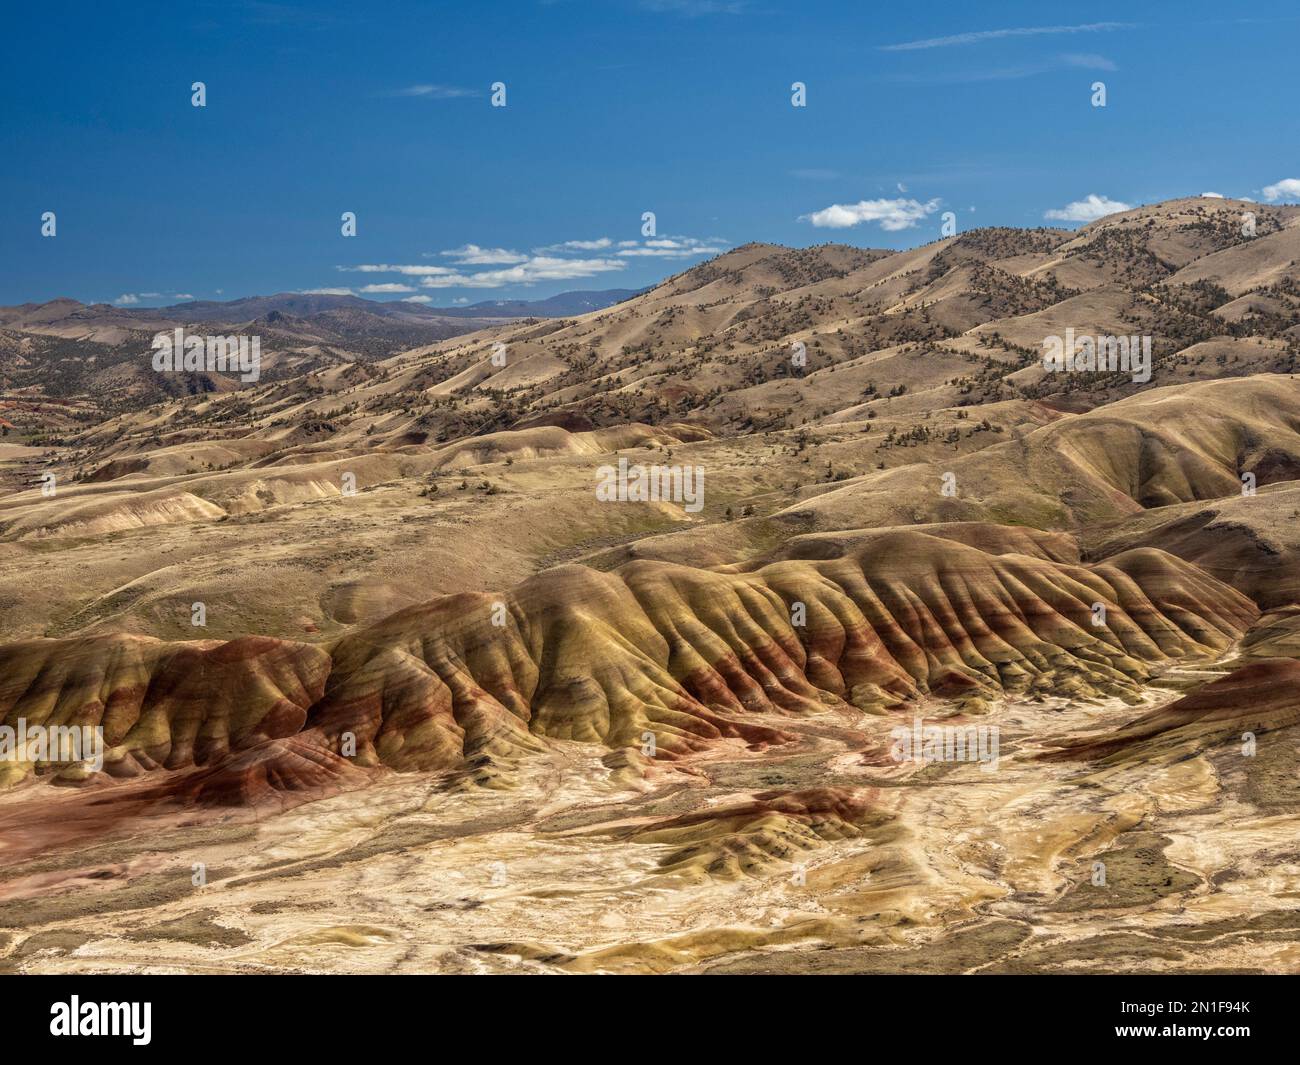 The Painted Hills, listed as one of the Seven Wonders of Oregon, John Day Fossil Beds National Monument, Oregon, United States of America Stock Photo